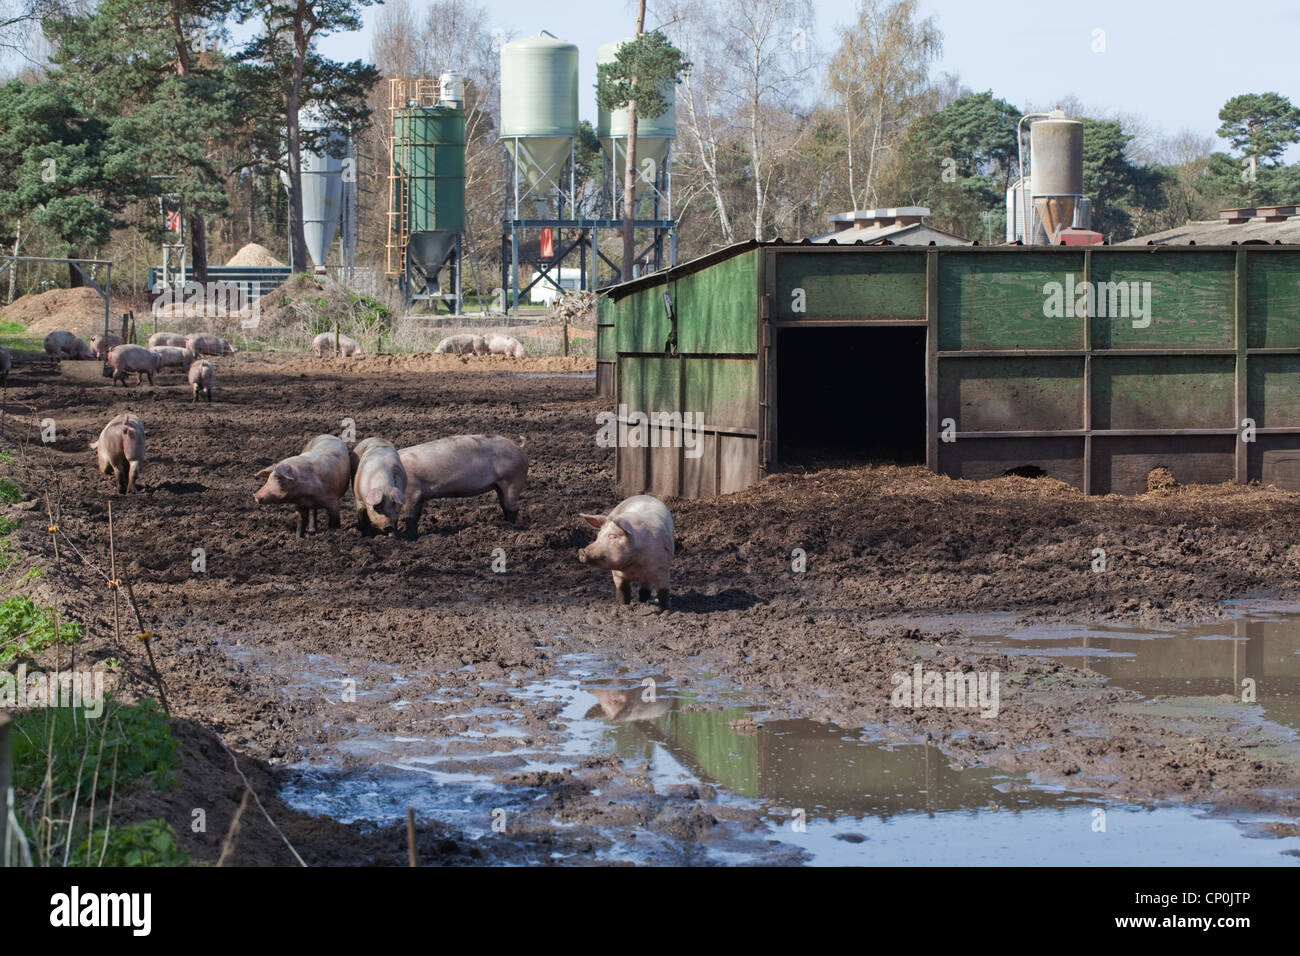 Domestic Pigs Sus scrofa. Pig Farm. Free ranging in the mud of a pen. Housing and open air, outdoor enclosure.Gravity feed bins. Stock Photo